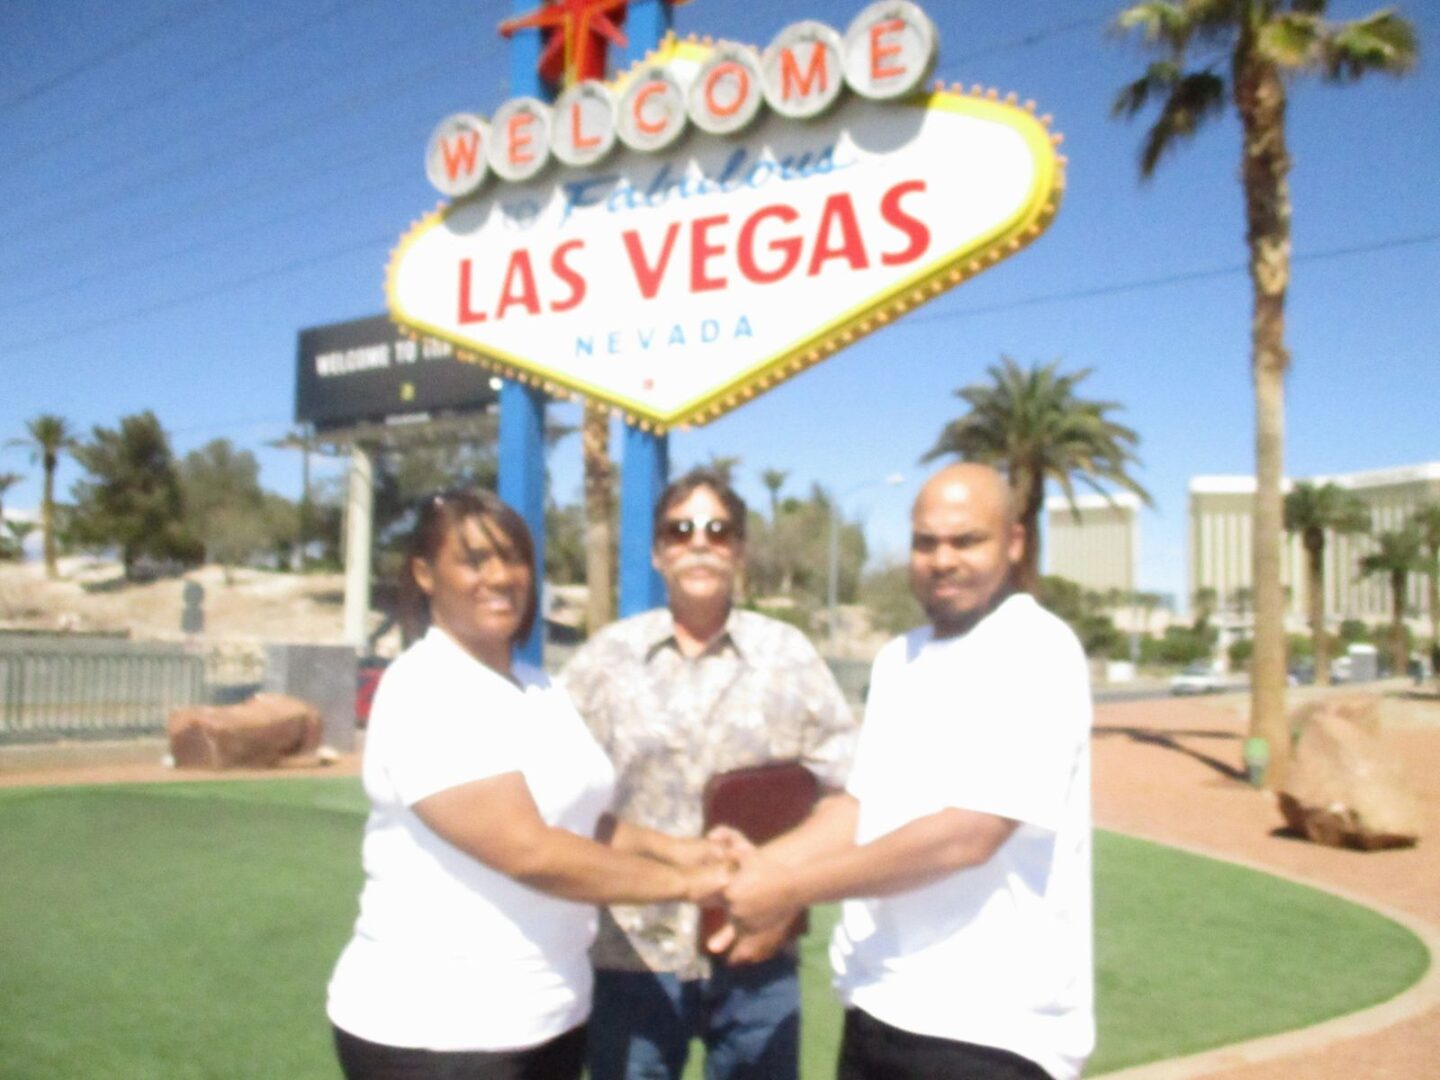 Three people are holding hands in front of a sign.